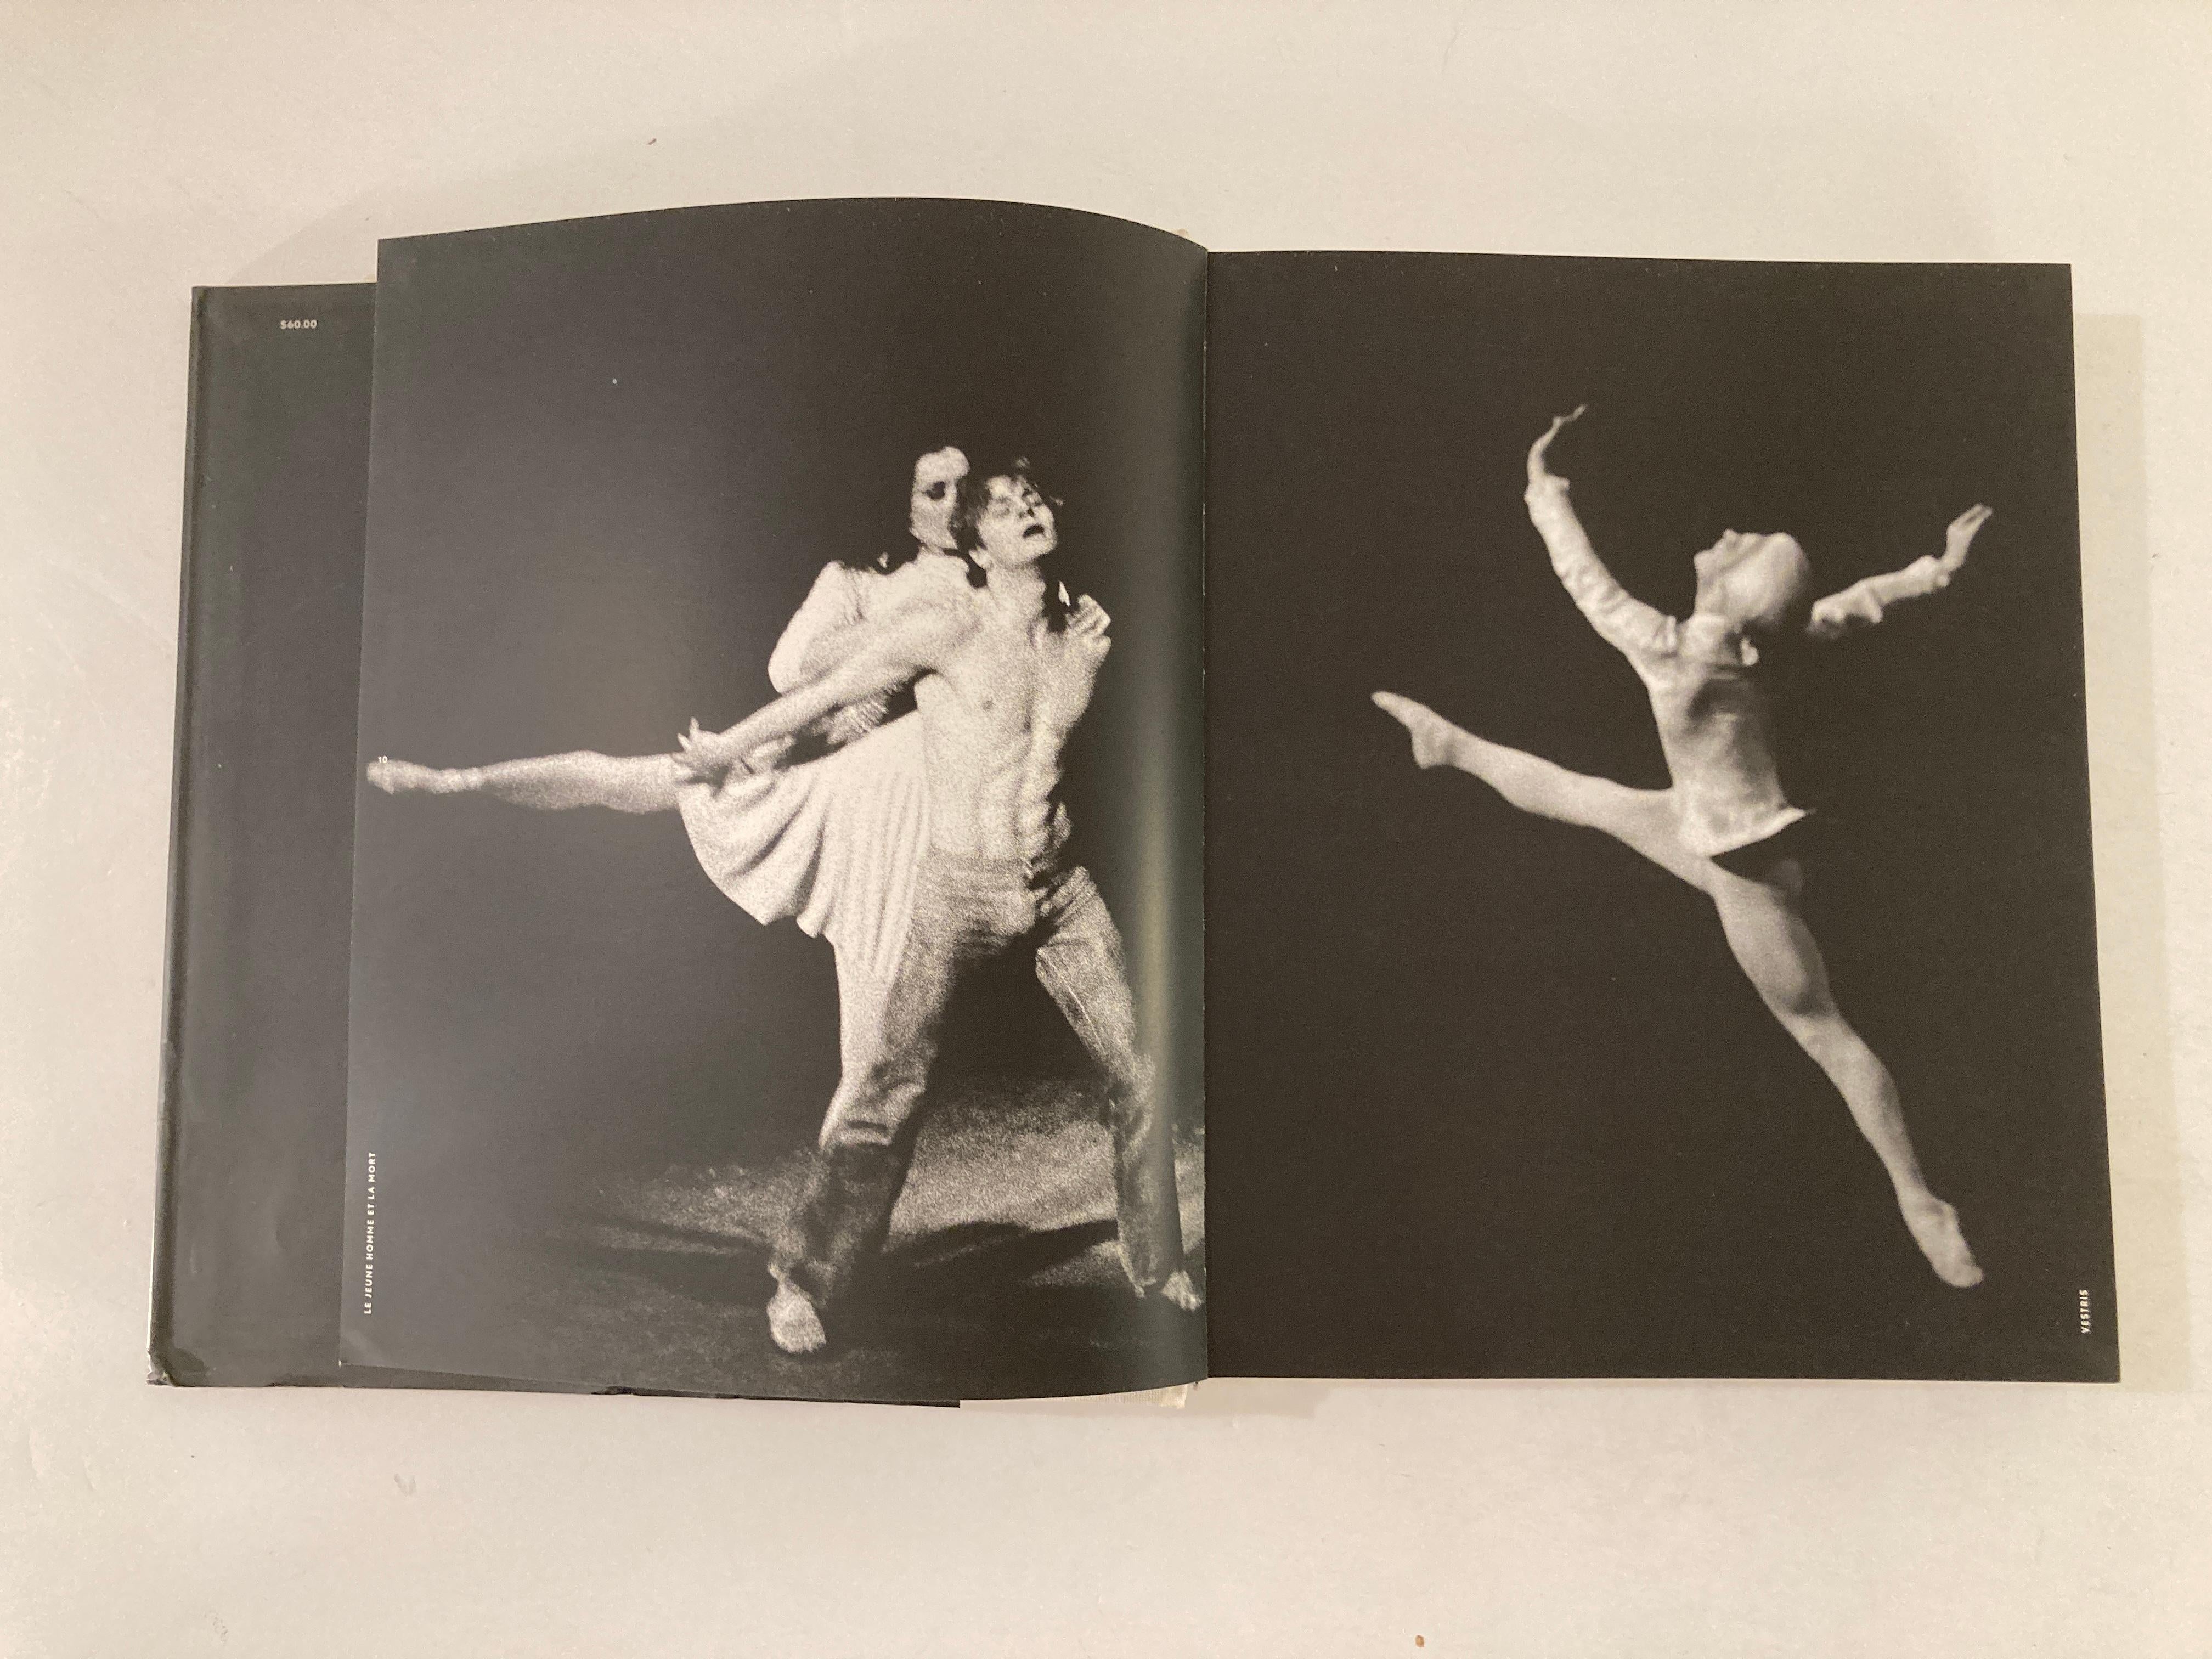 Baryshnikov in Back and White by Mikhail Baryshnikov Collectible Art Book In Good Condition For Sale In North Hollywood, CA